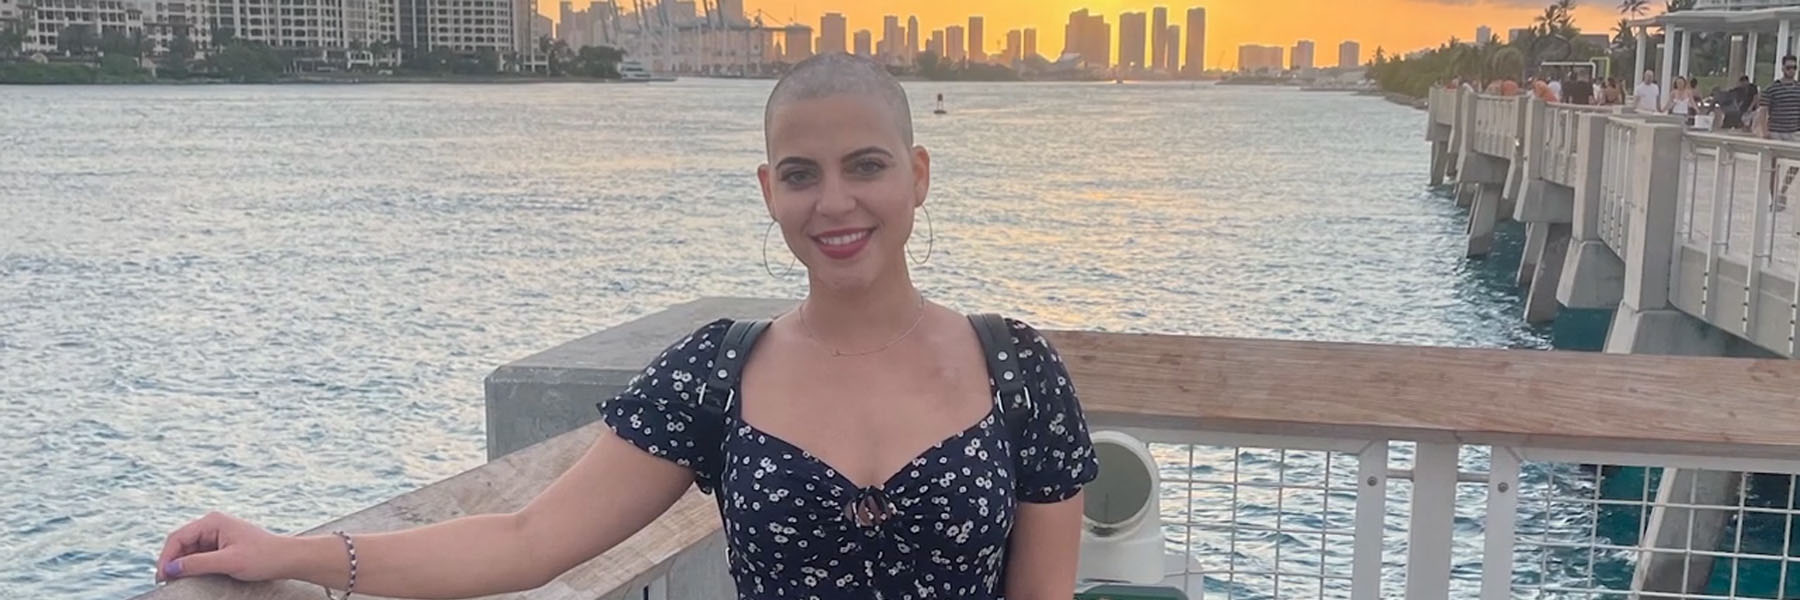 Smiling woman with shaved head with the Miami waterway and sunset in the background